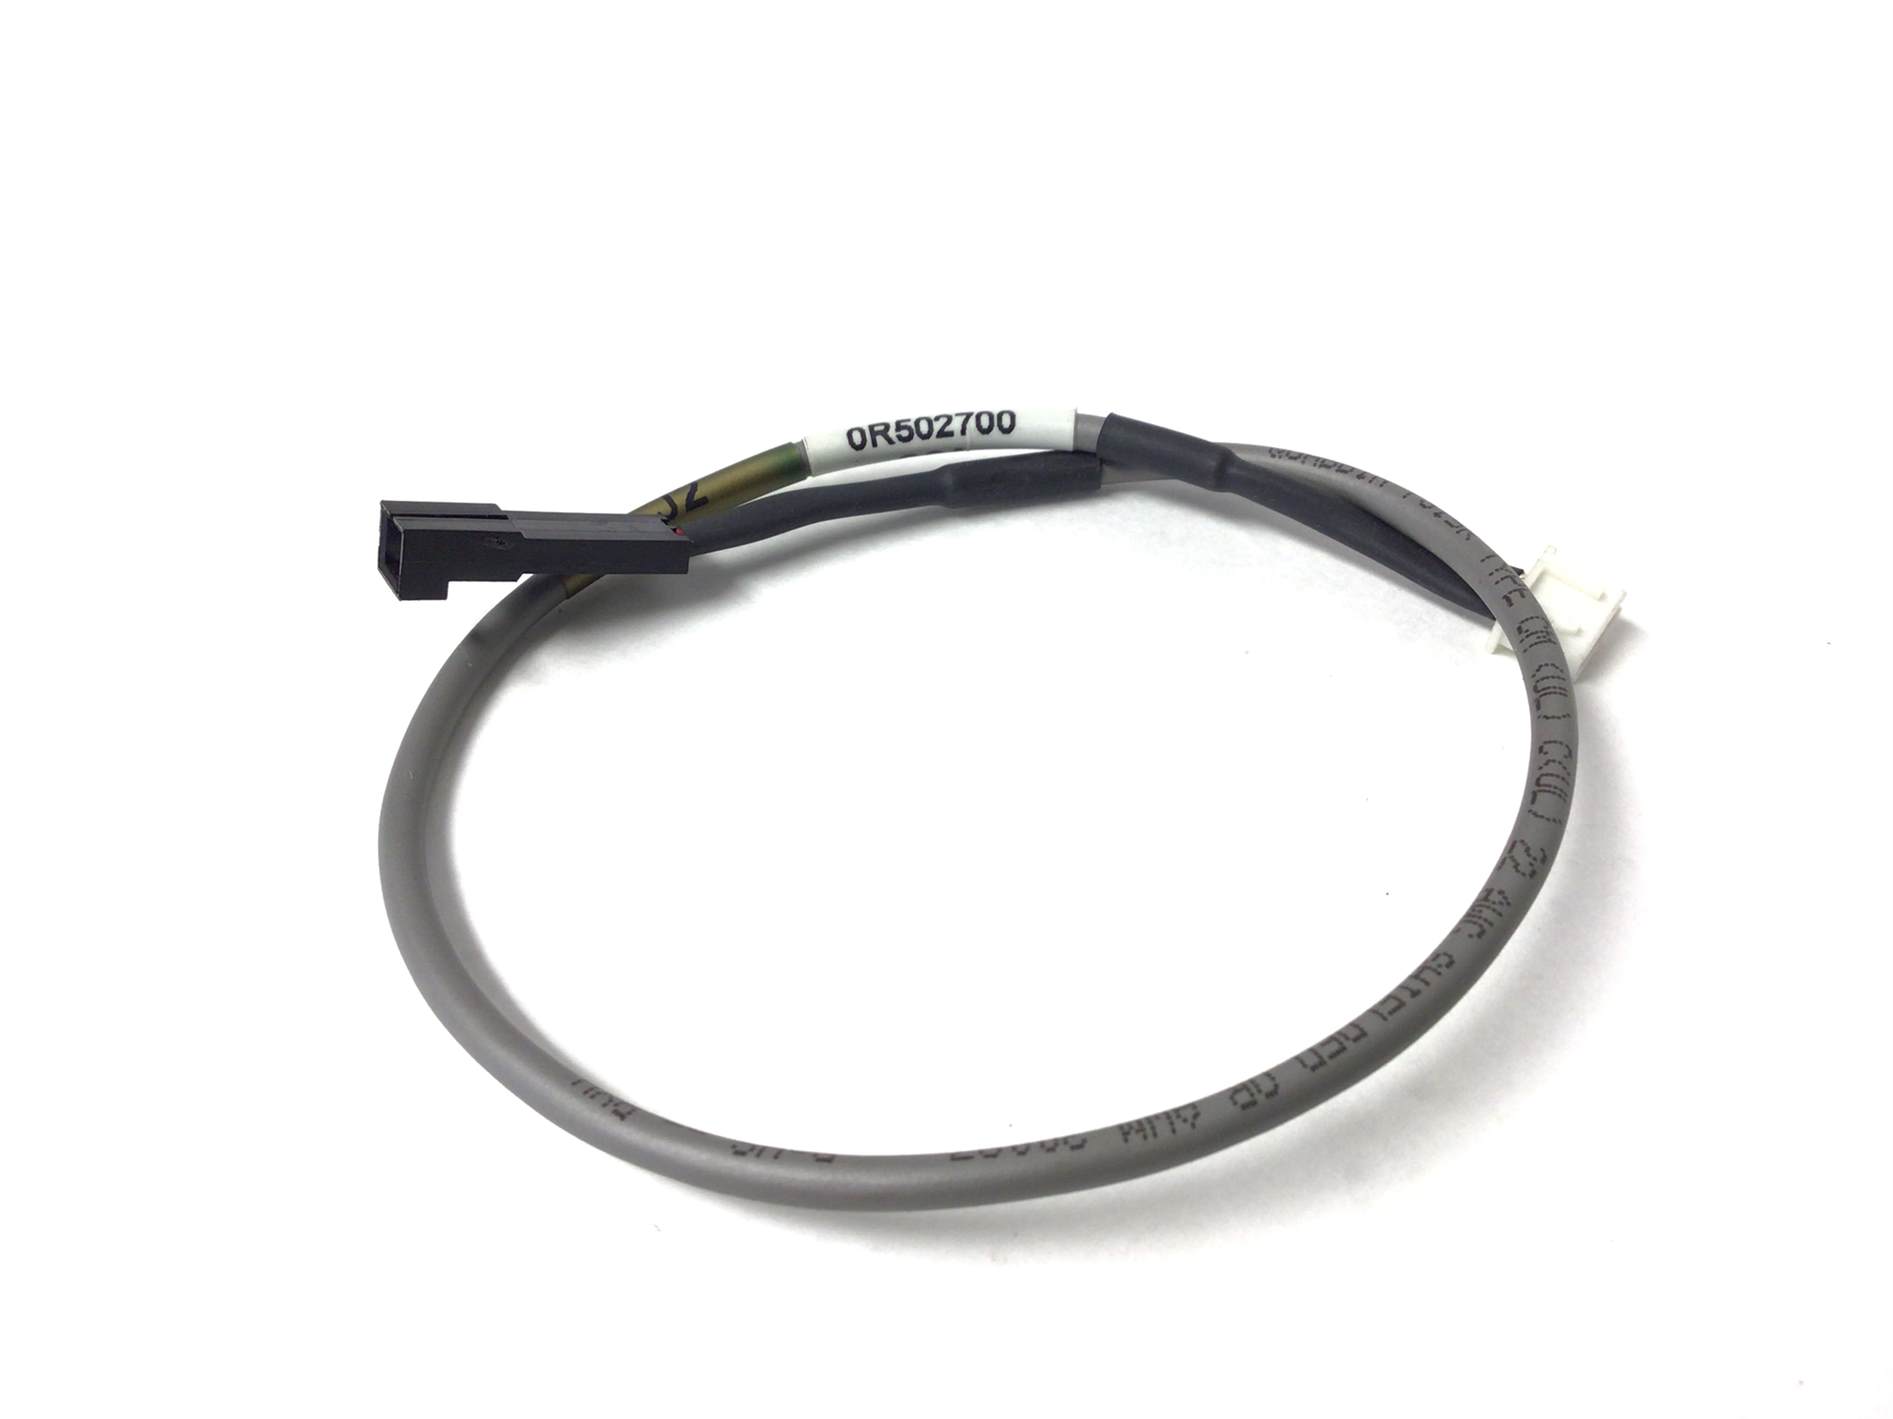 User's Right Fan Cable (Used)